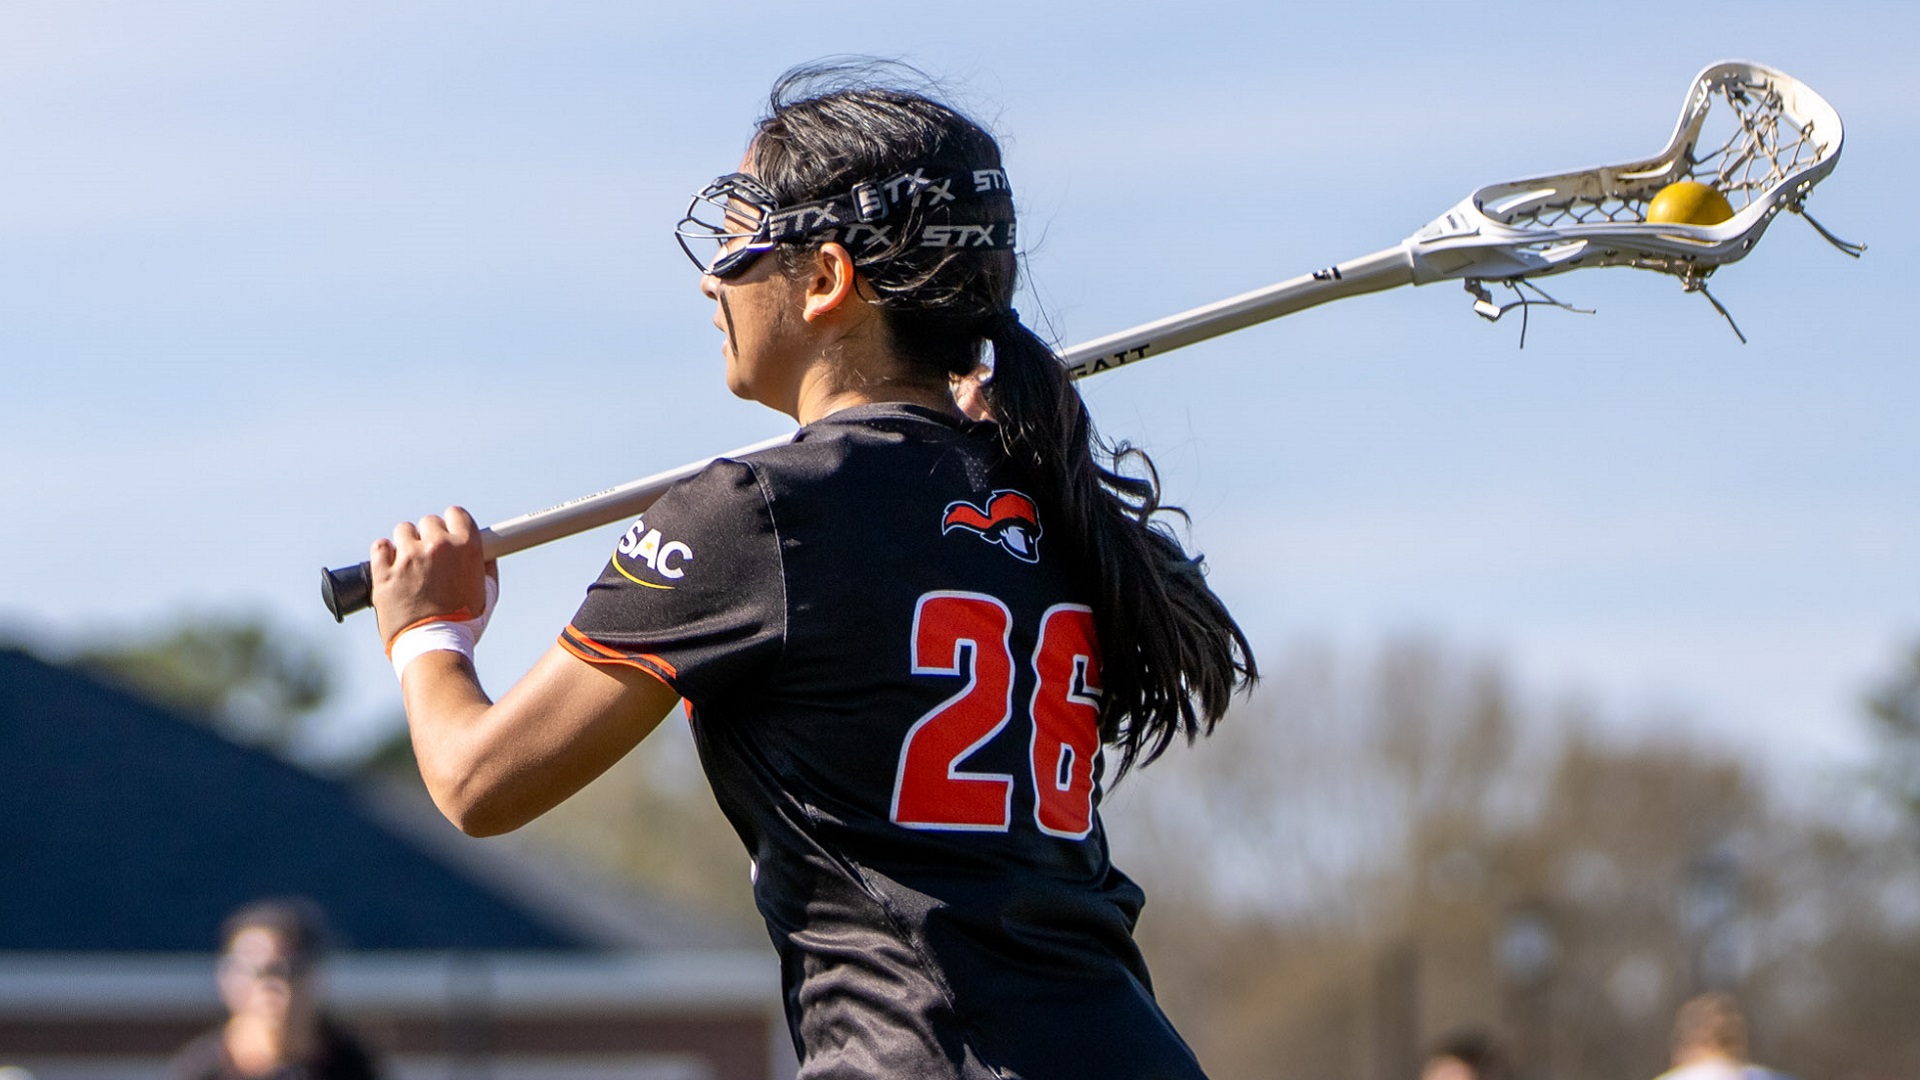 Paetyn Hoffmann scored two goals for the Pioneers at Anderson (photo by Kari Ham)